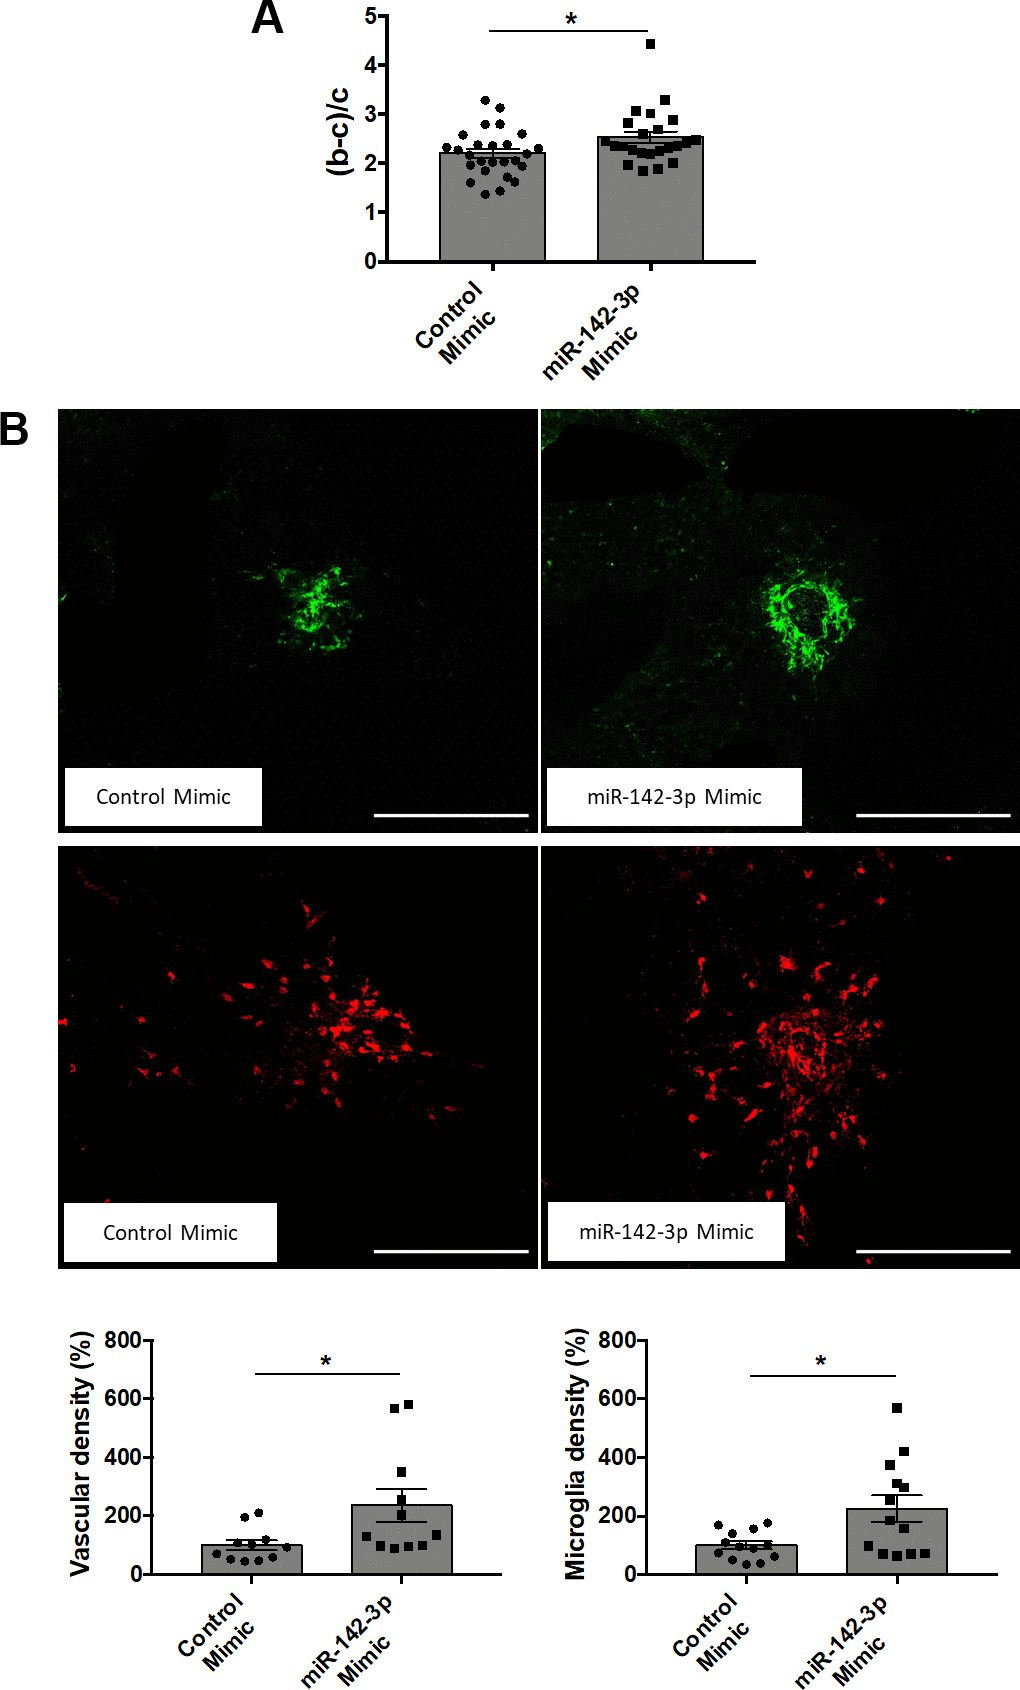 Overexpression of miR-142-3p in a laser-induced CNV mouse model increases both vascular and inflammatory phenotypes. (A) OCT measurement presented as (b-c)/c ratios where b is the CNV lesion thickness and c is the adjacent choroid thickness. b and c were measured just prior to sacrifice (n = 24-26 per experimental group). (B) Flat-mounted choroids showing vascular (in green) and microglia (in red) density and corresponding quantification. Scale bar = 250 μm (n = 11-13 per experimental group). All results are presented as mean +- SEM. Mann Whitney test (* = p ≤ 0.05).